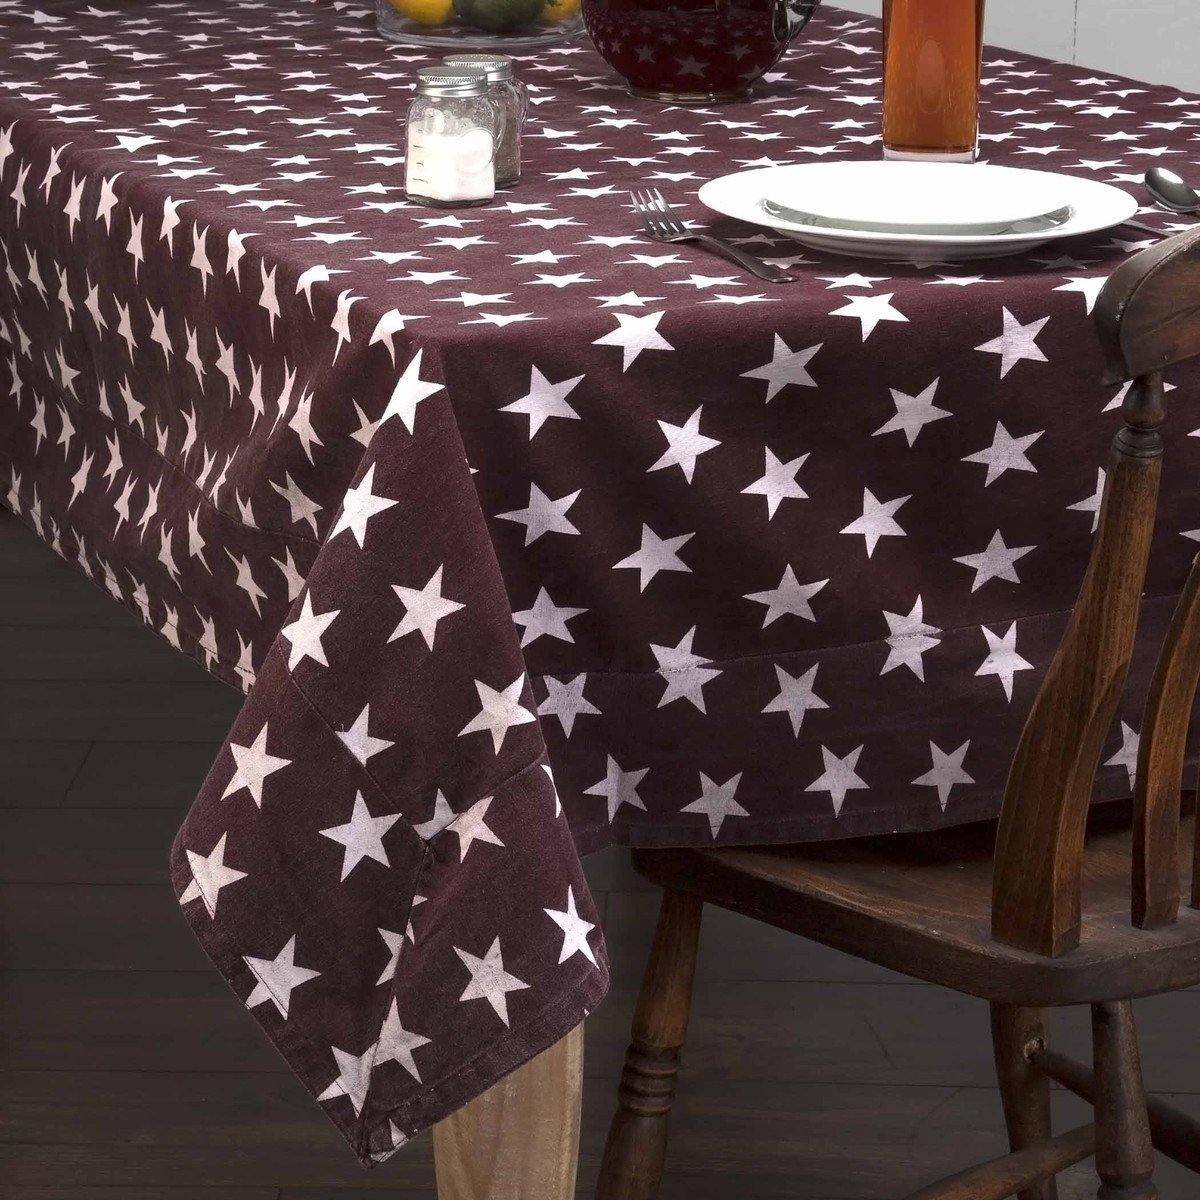 Multi Star Red Table Cloth 60"x80" VHC Brands - The Fox Decor